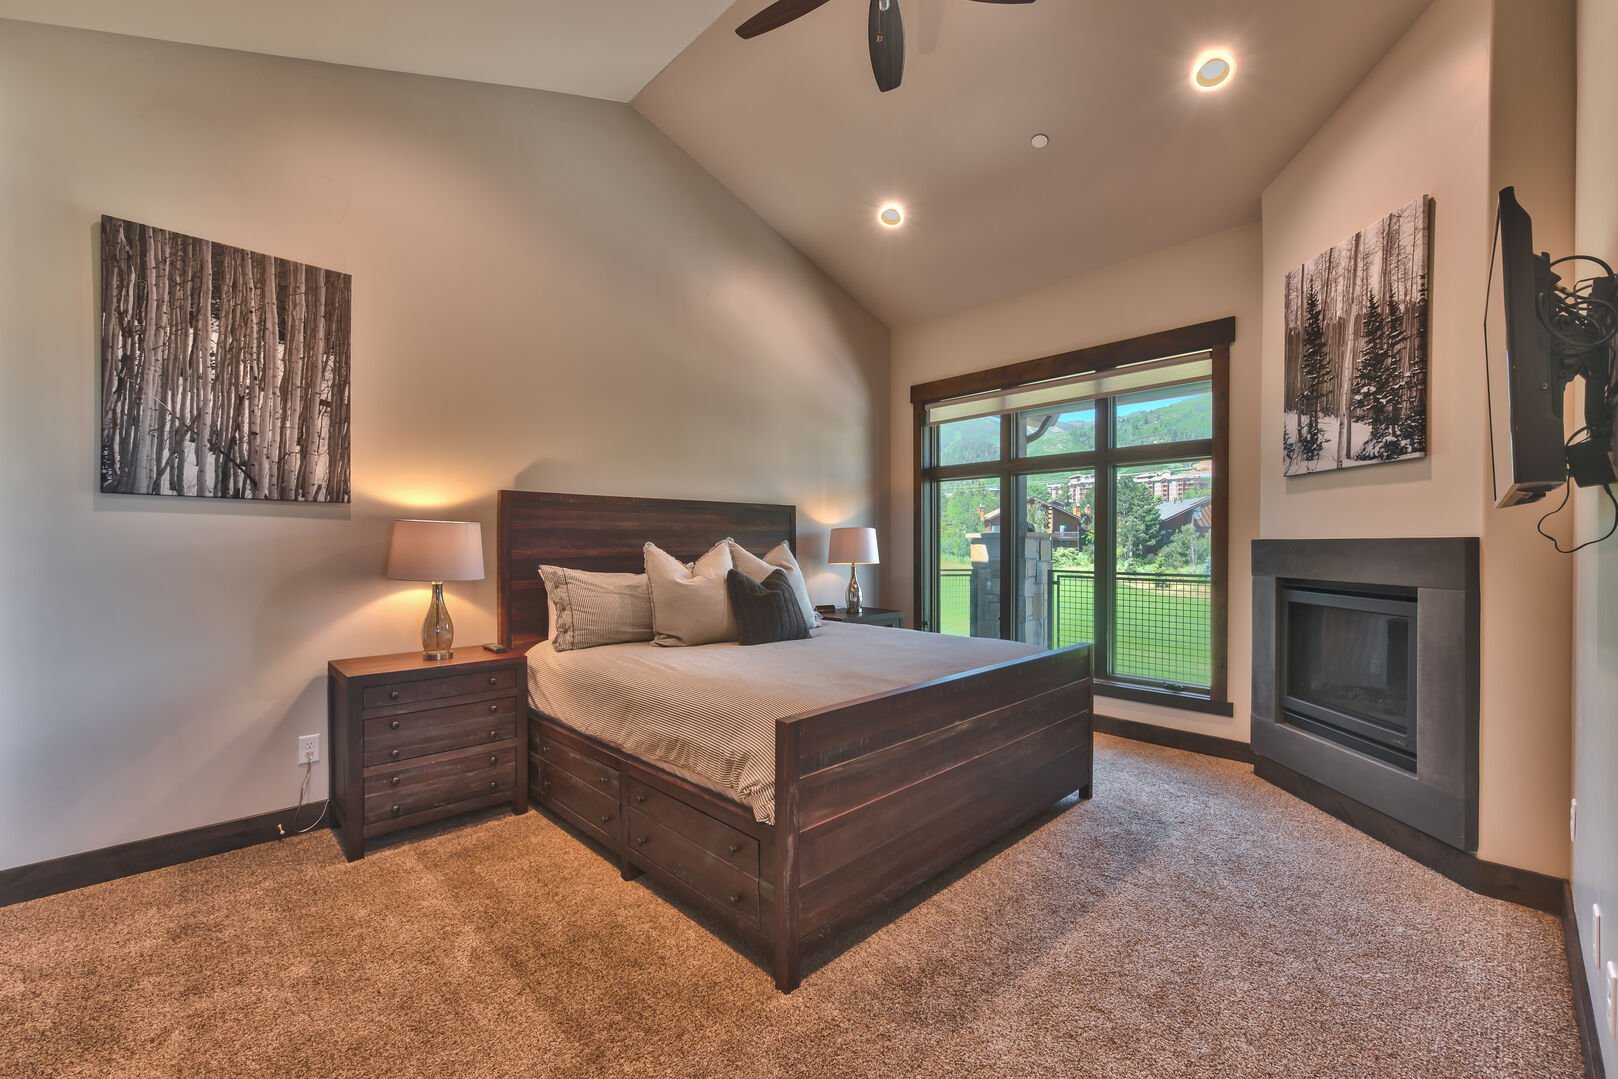 Master bedroom has a king bed and fireplace